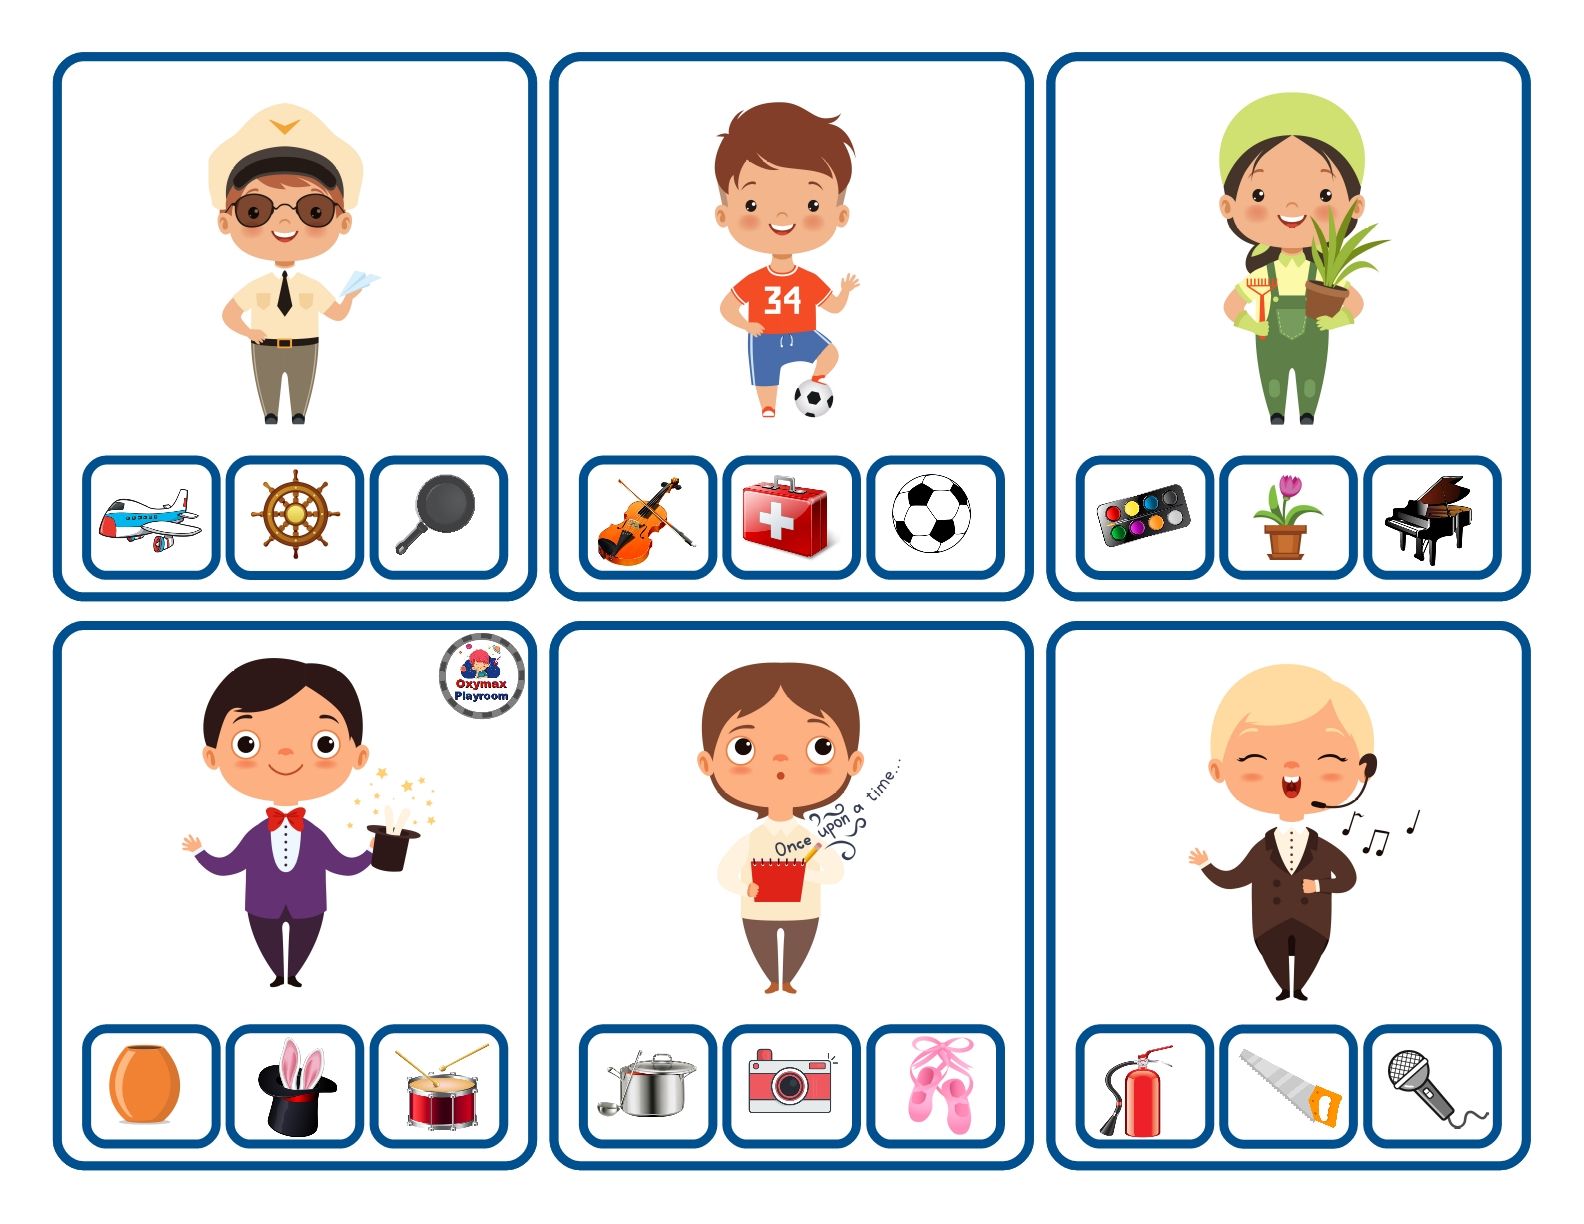 Educational game "Professions" for children